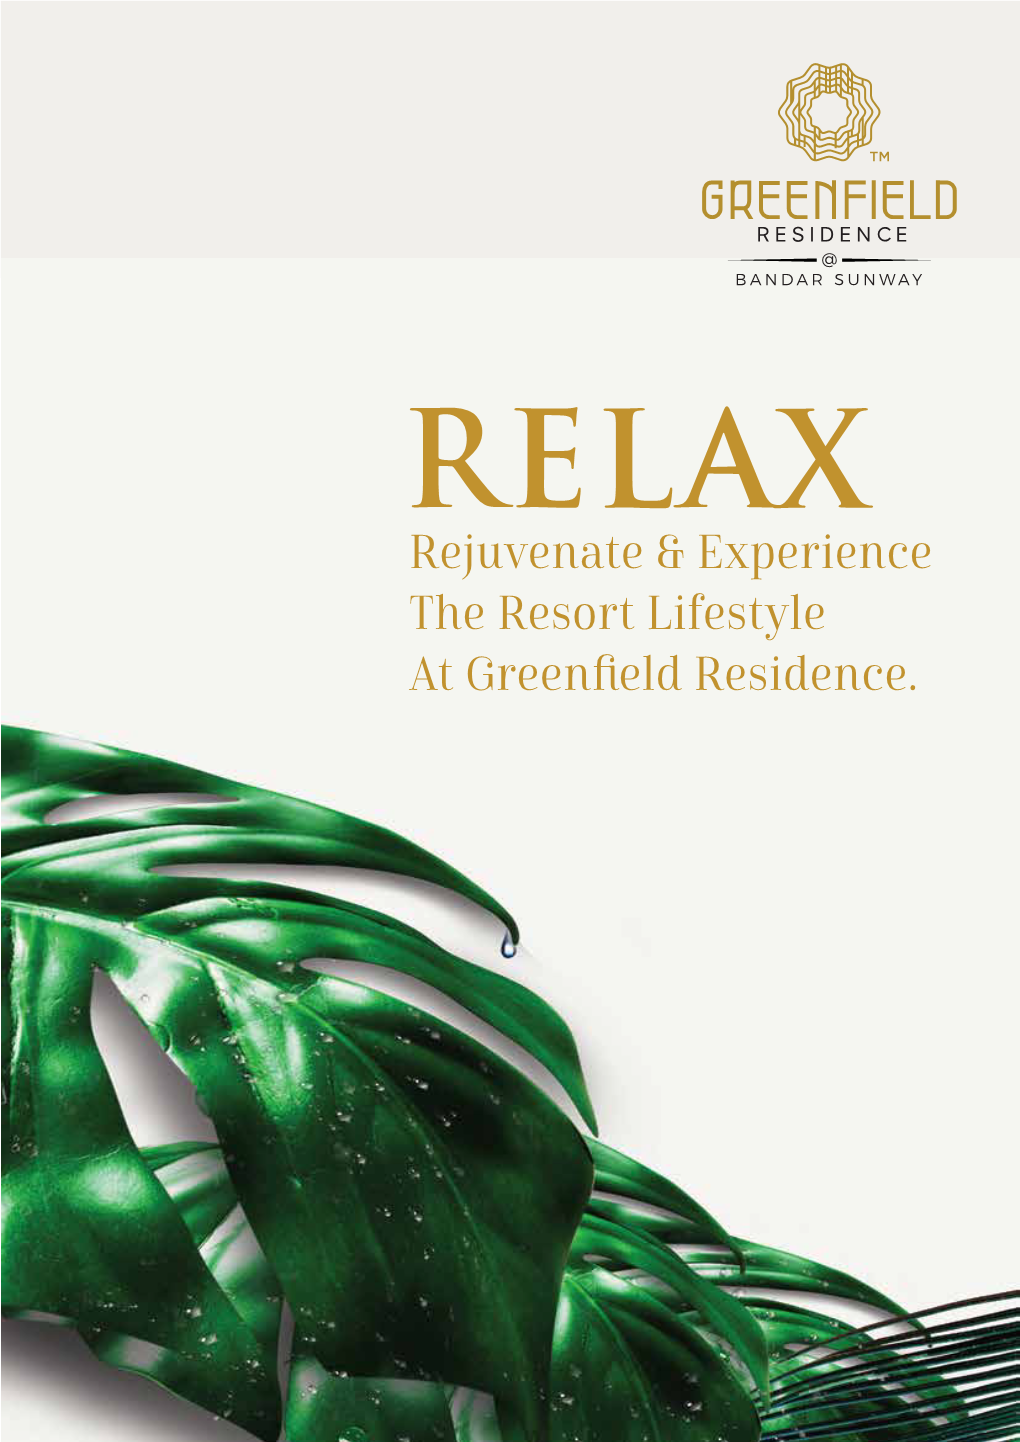 Rejuvenate & Experience the Resort Lifestyle at Greenfield Residence